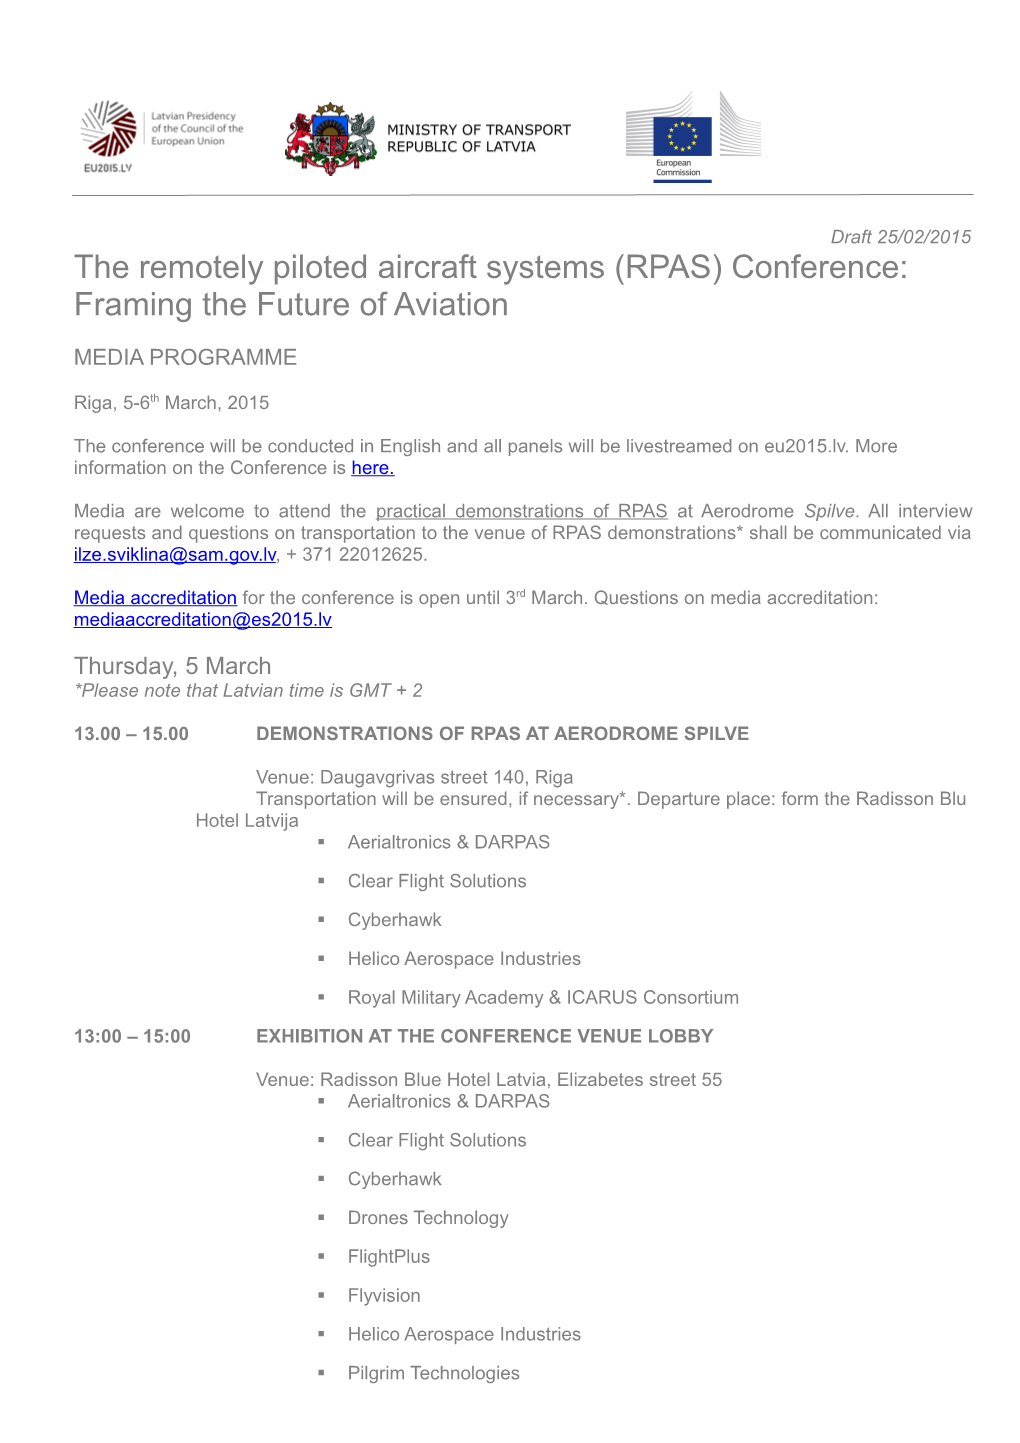 The Remotely Piloted Aircraft Systems (RPAS) Conference